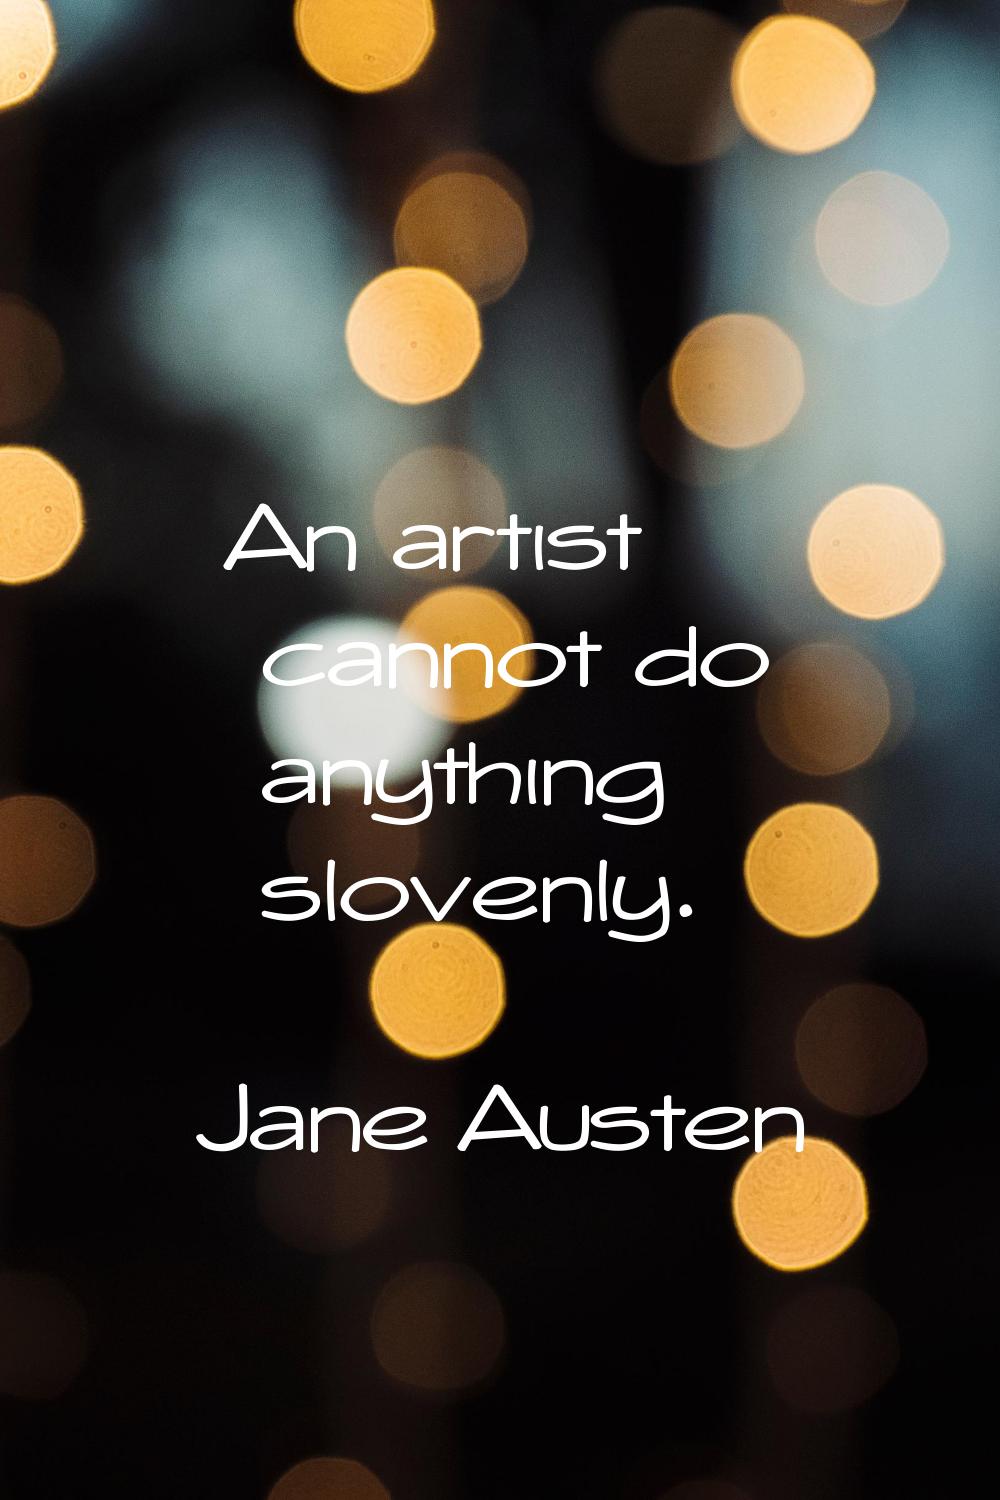 An artist cannot do anything slovenly.